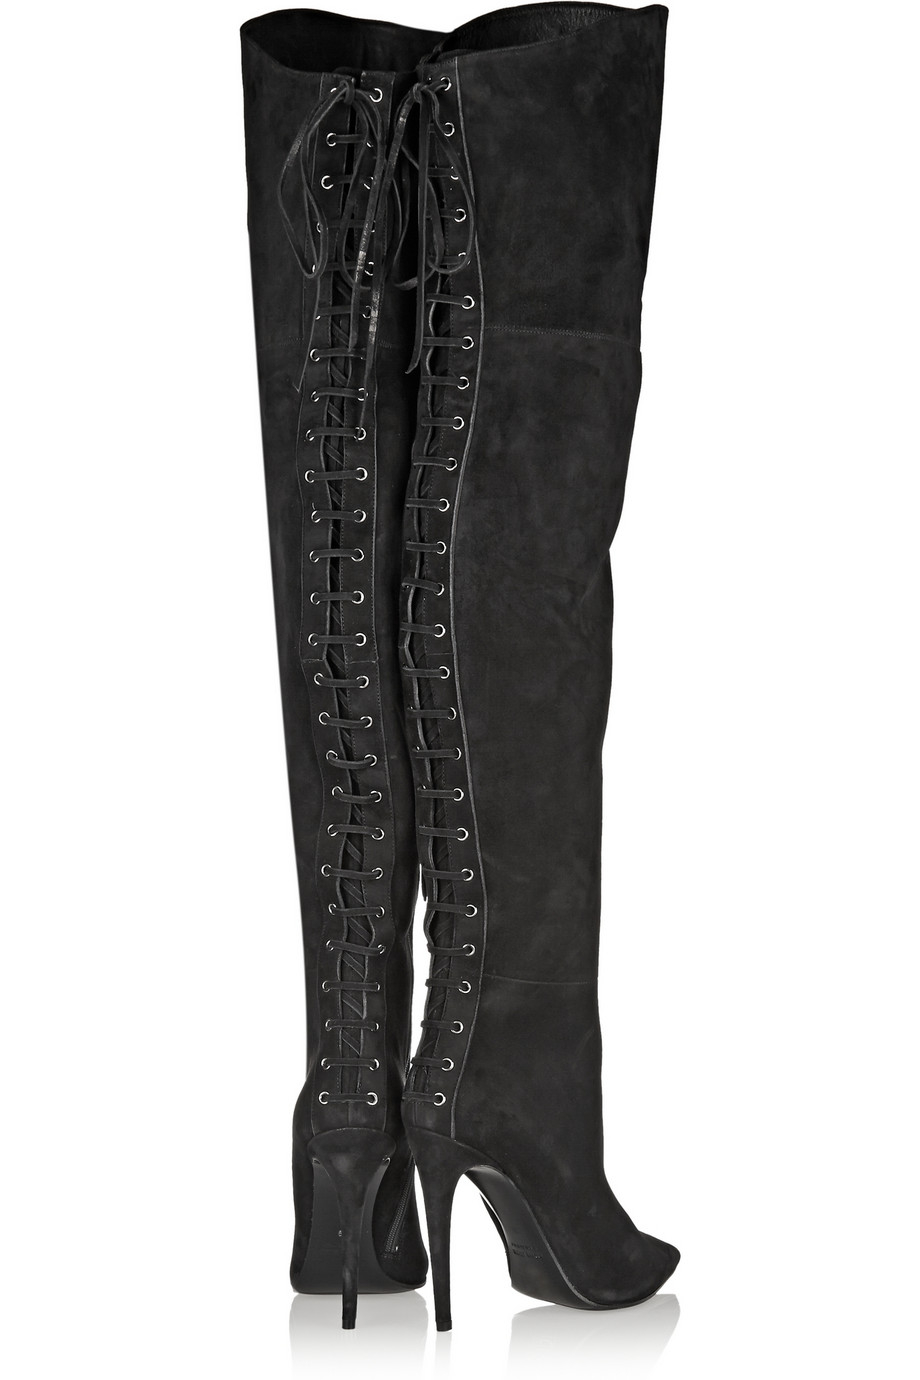 Lyst - Miu Miu Suede Over-The-Knee Boots in Black